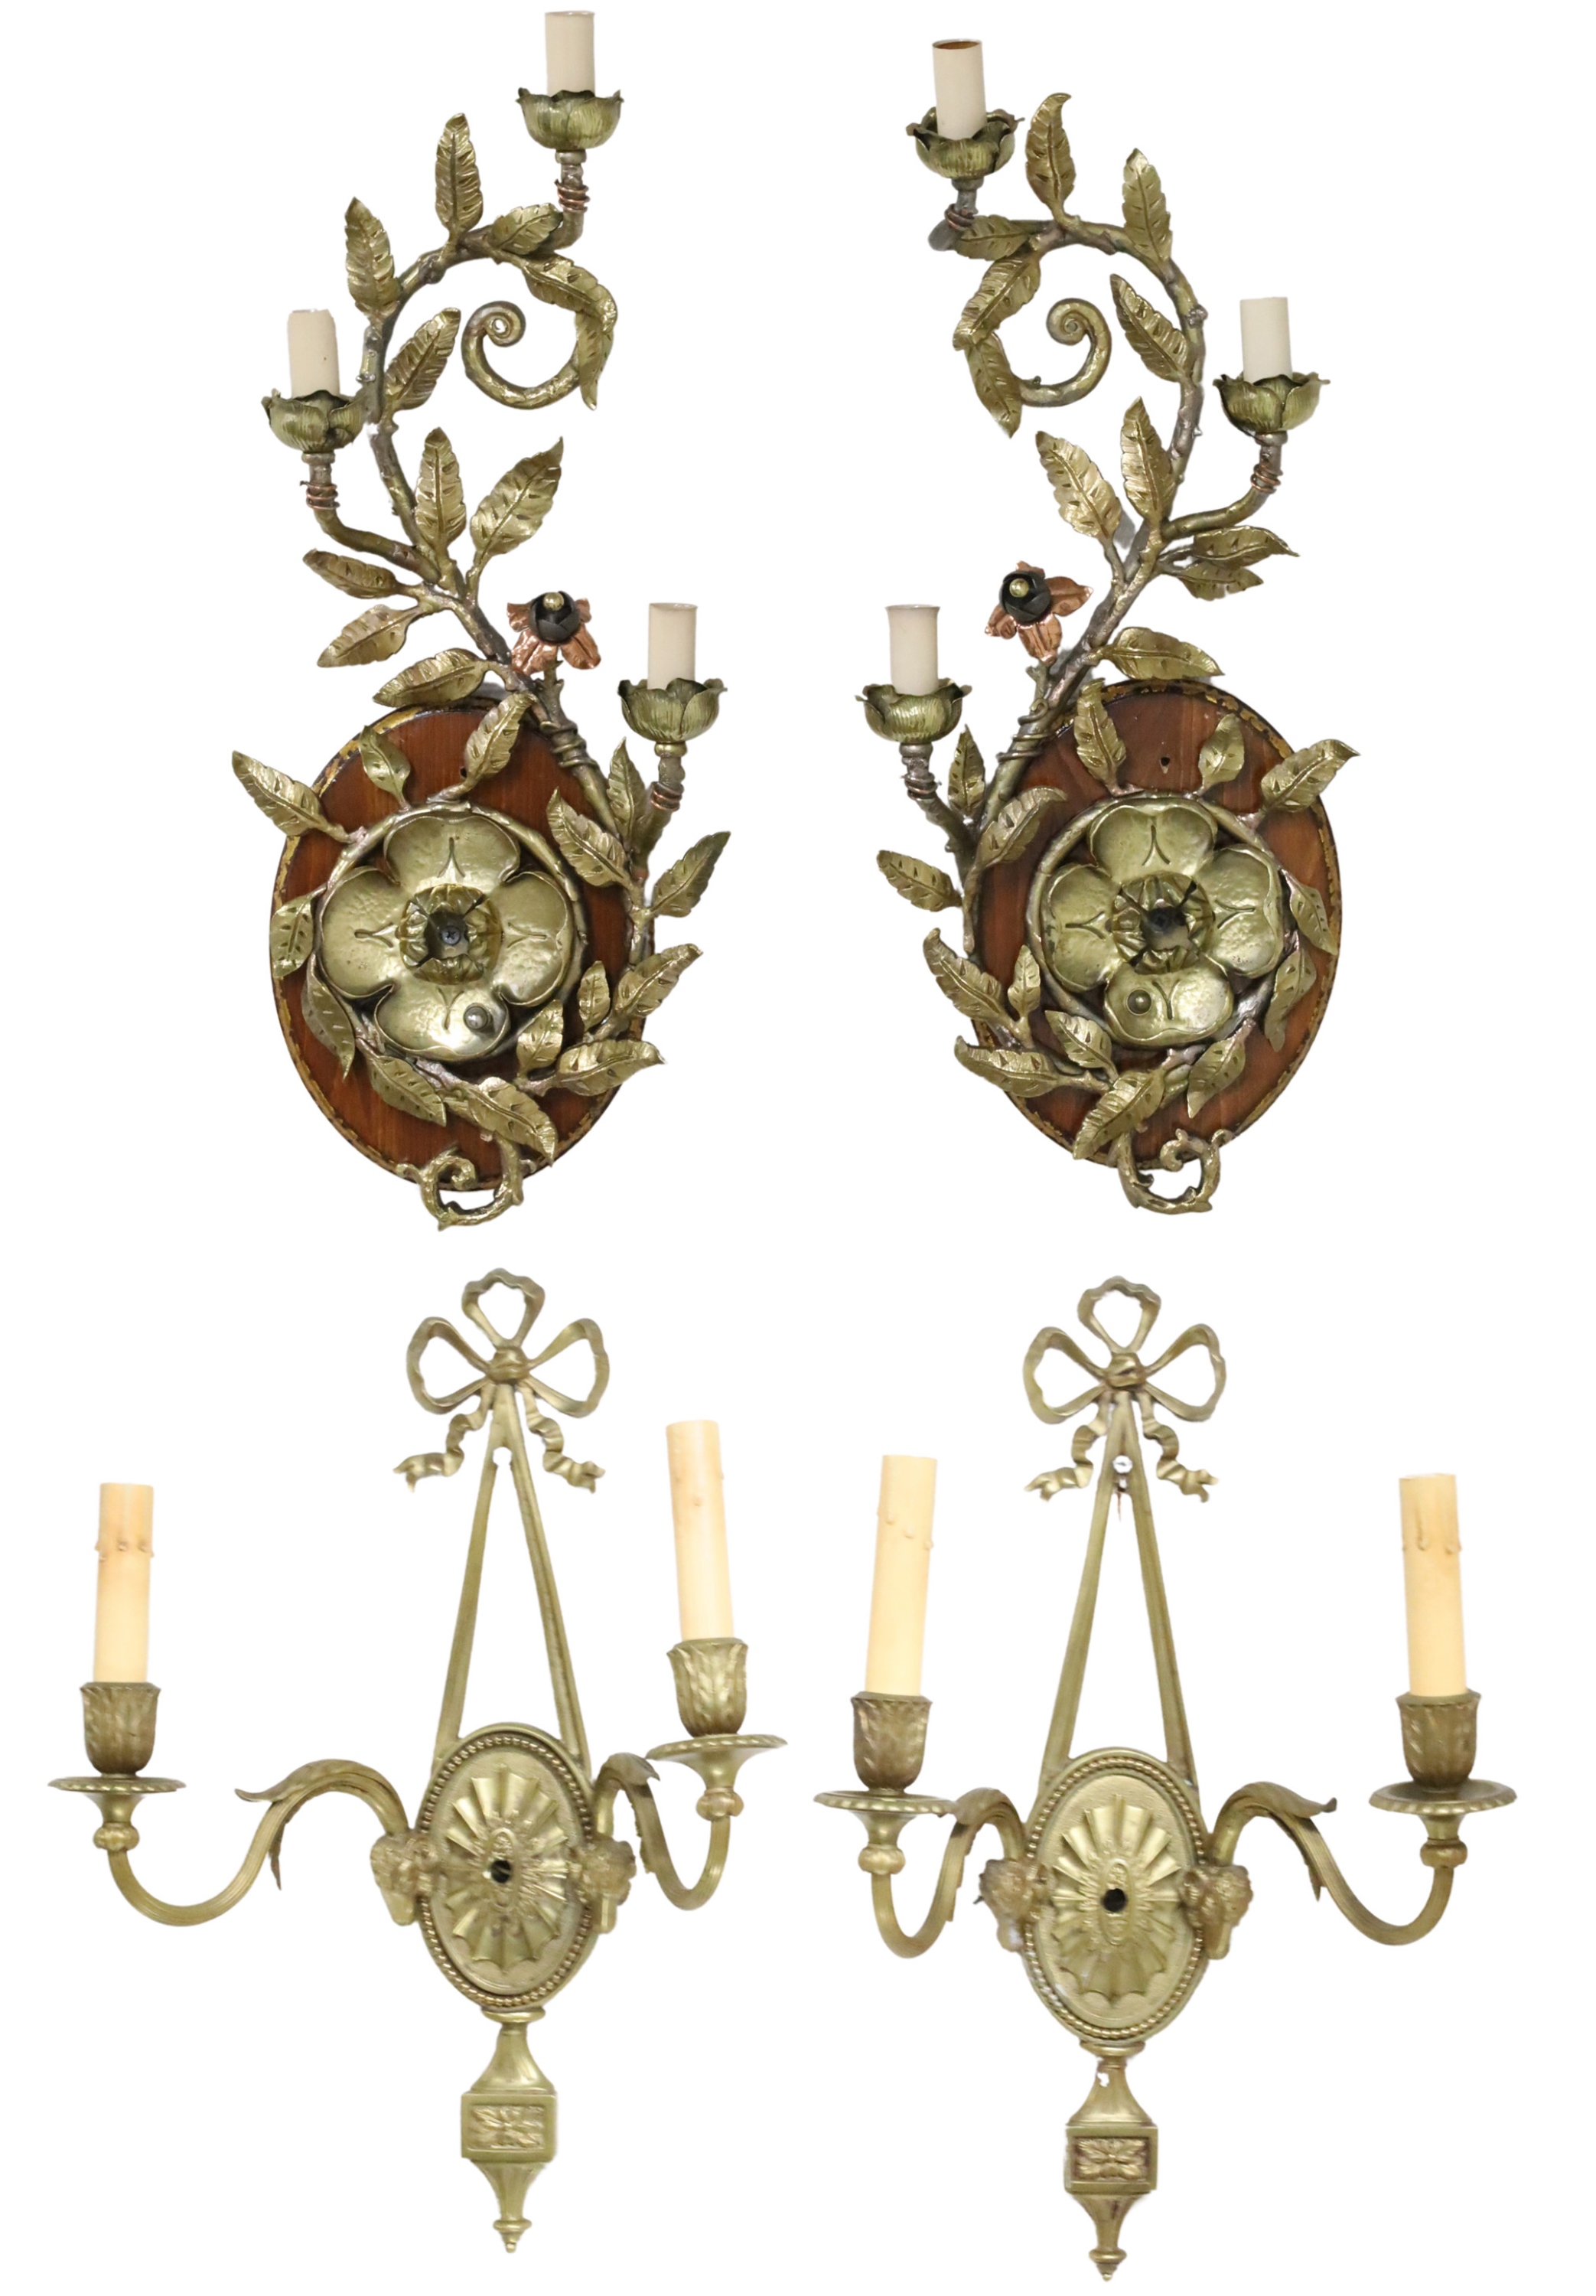 2 MISC PRS OF WALL SCONCES 2 3b3b4c